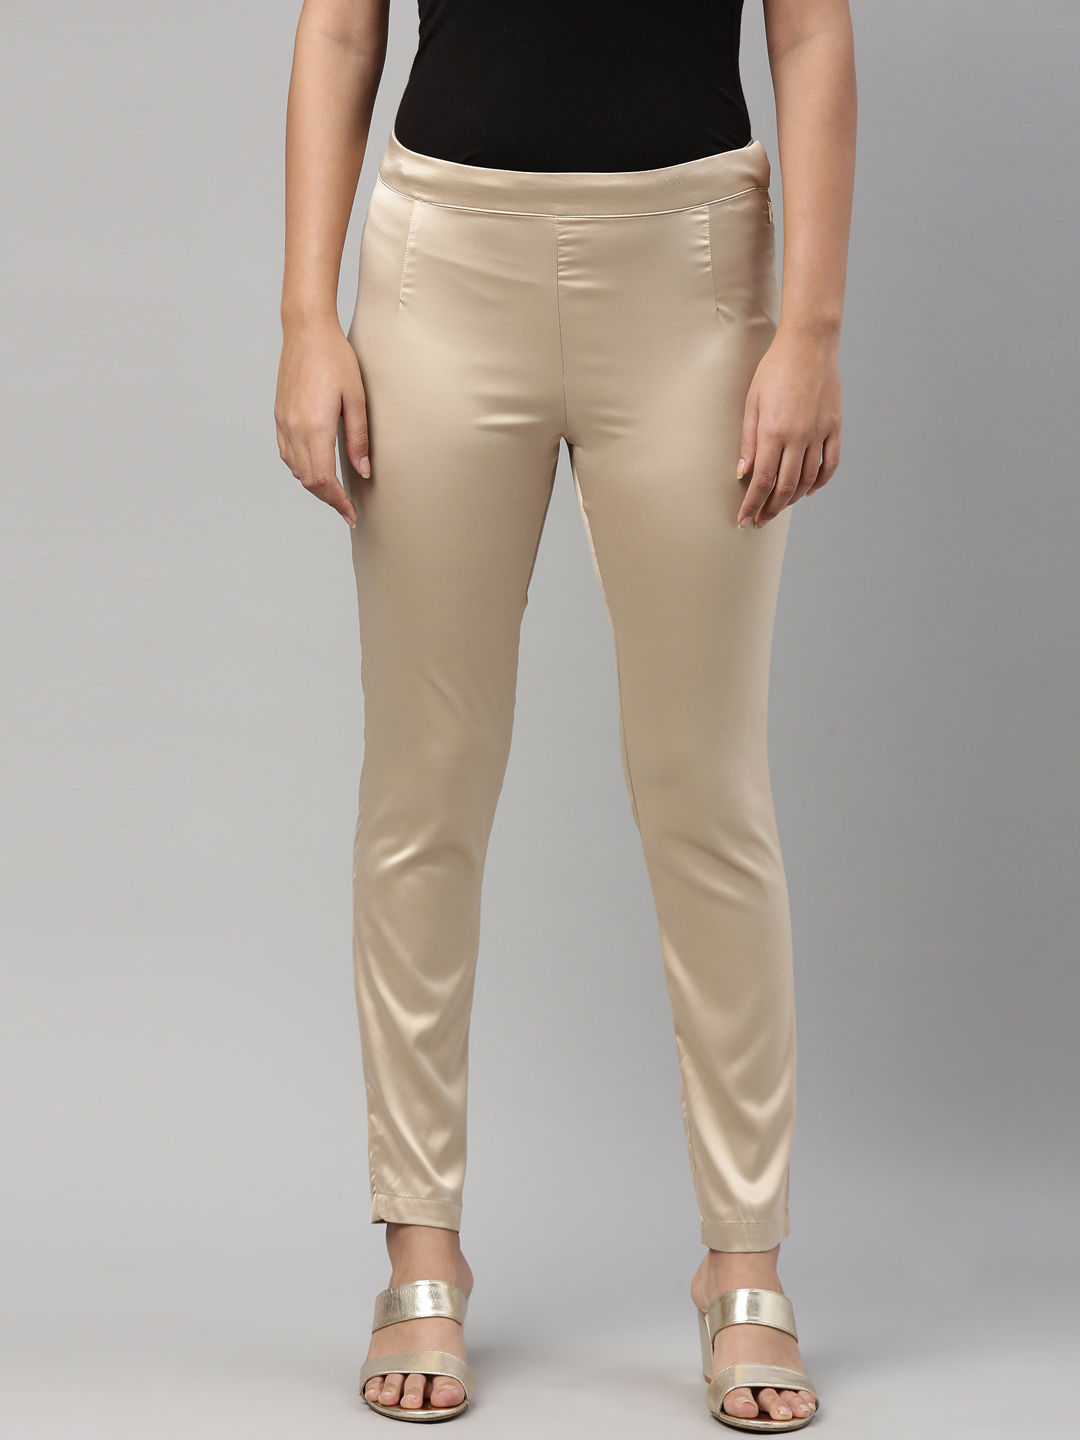 Go Colors Women Light Solid Polyester Mid Rise Shiny Pants  Gold Buy Go  Colors Women Light Solid Polyester Mid Rise Shiny Pants  Gold Online at  Best Price in India  Nykaa